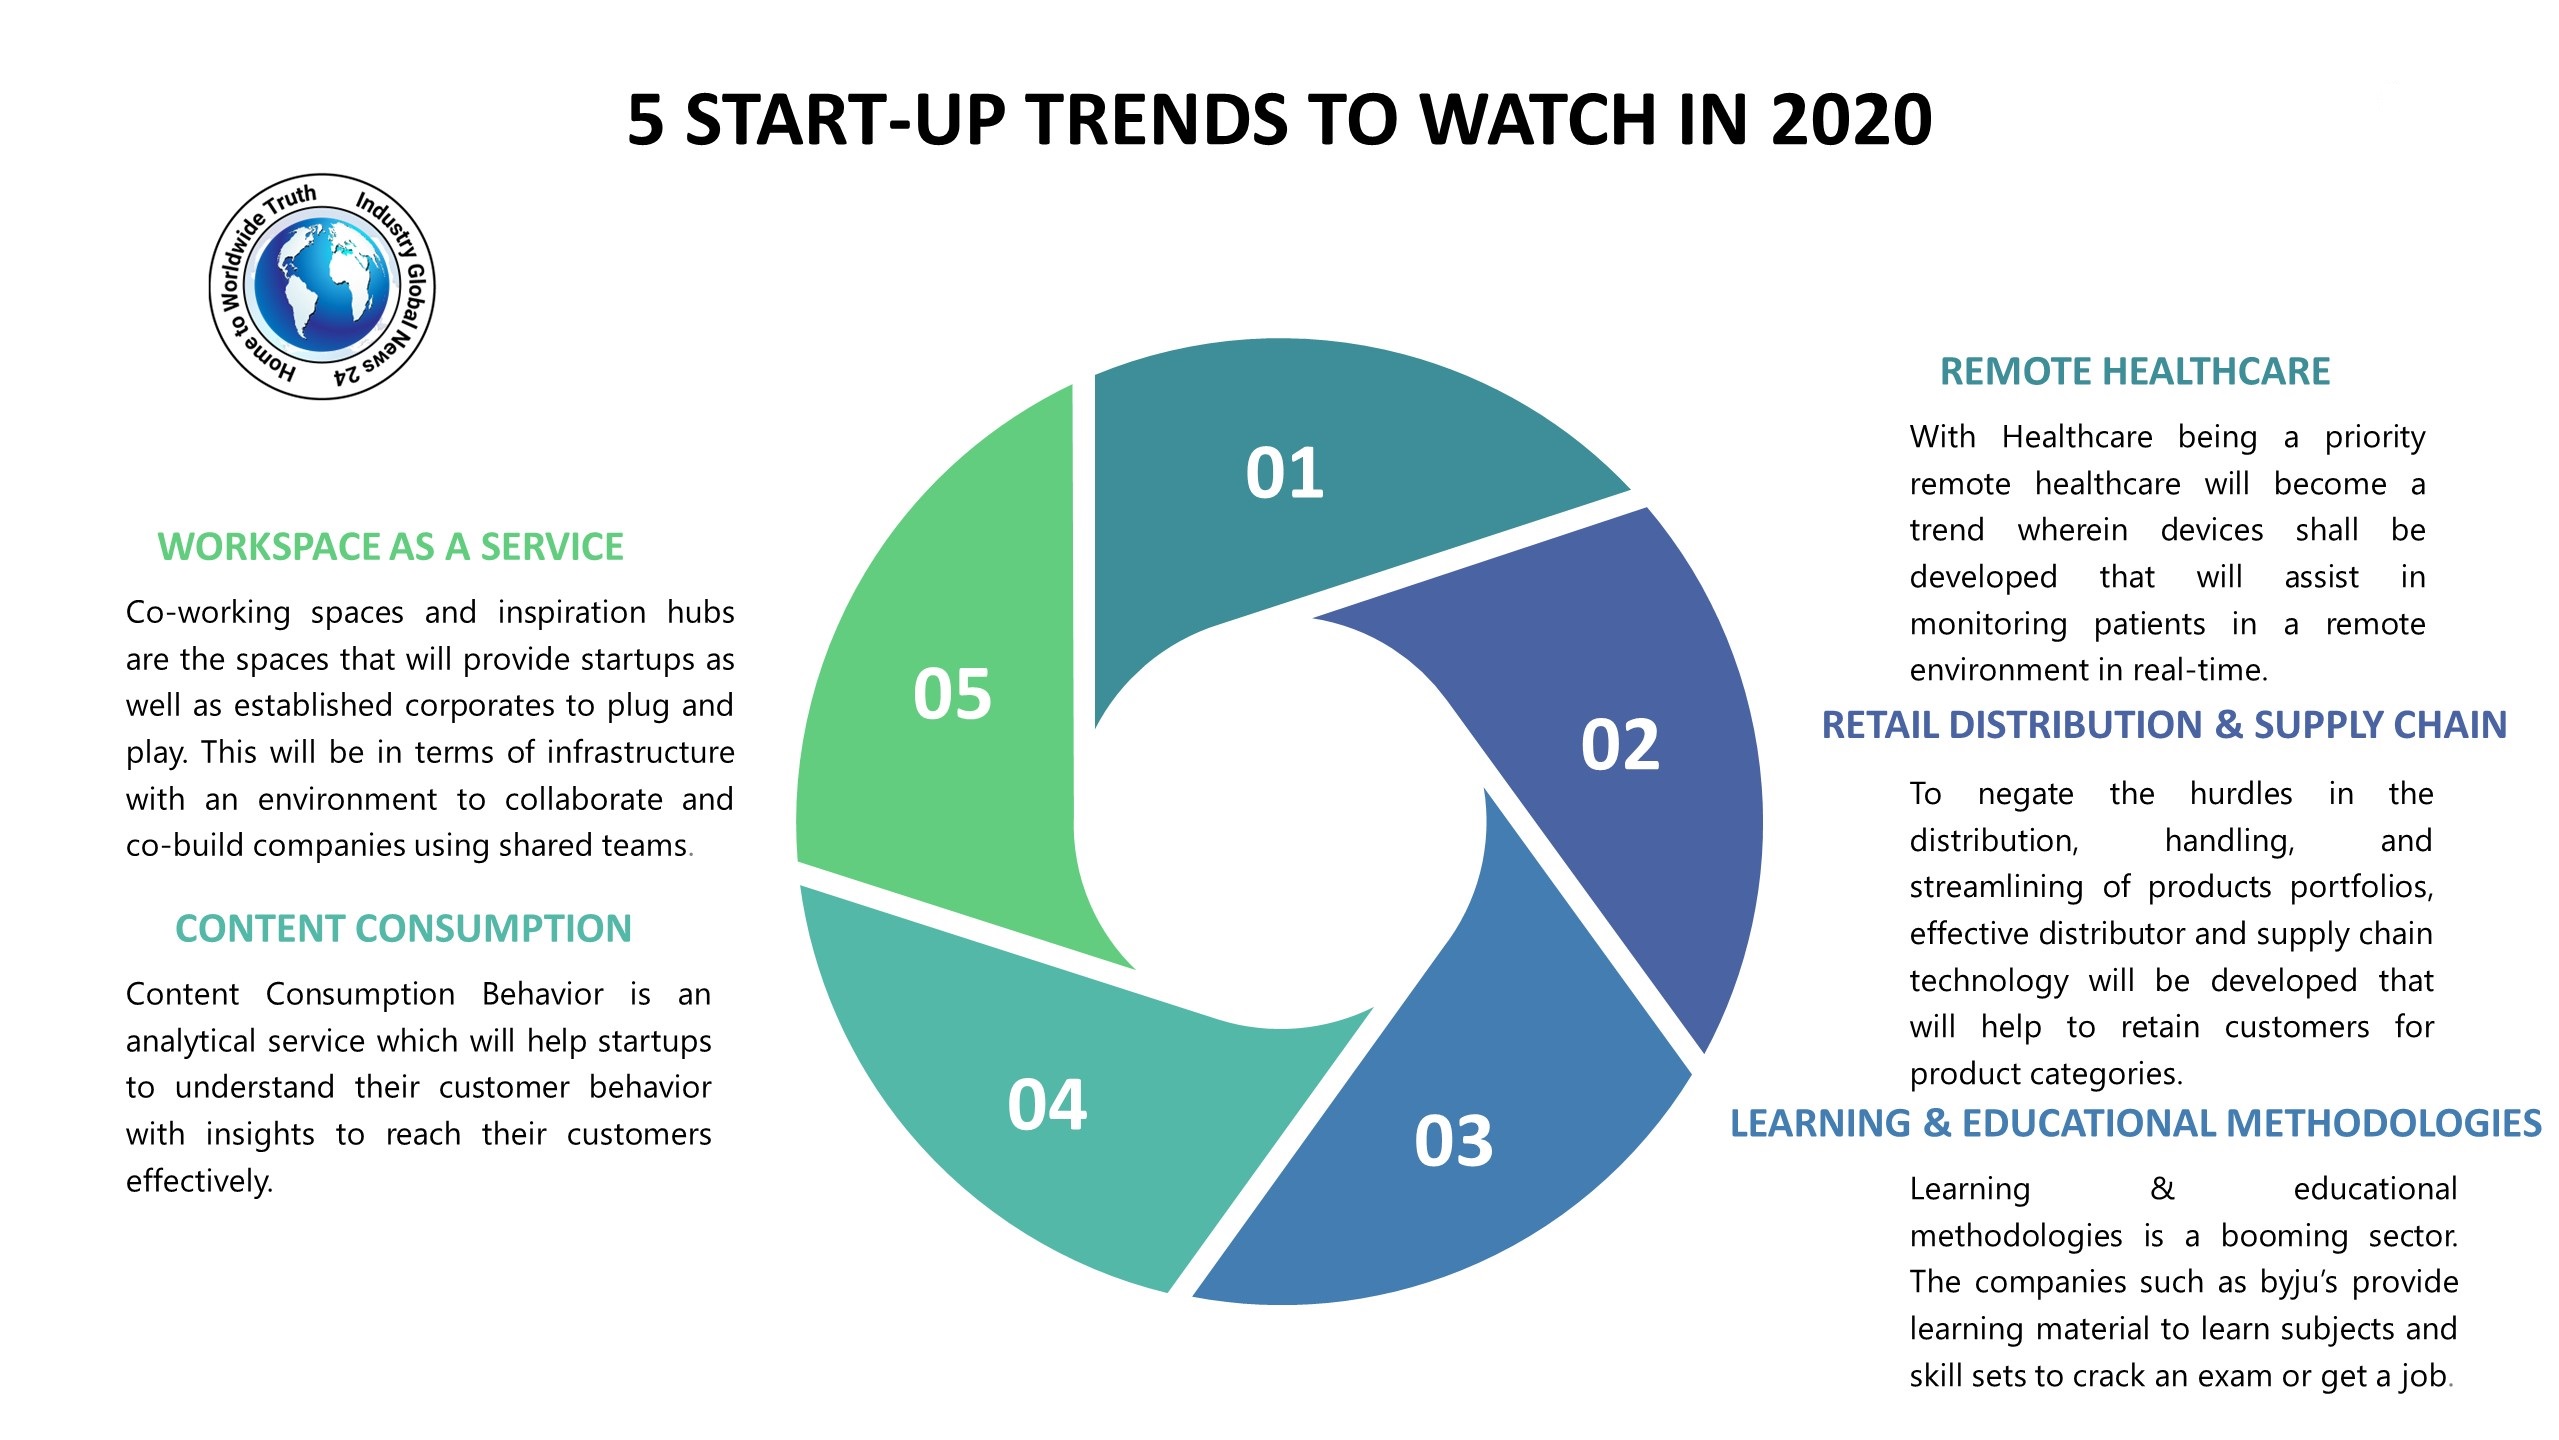 5 START-UP TRENDS TO WATCH IN 2020